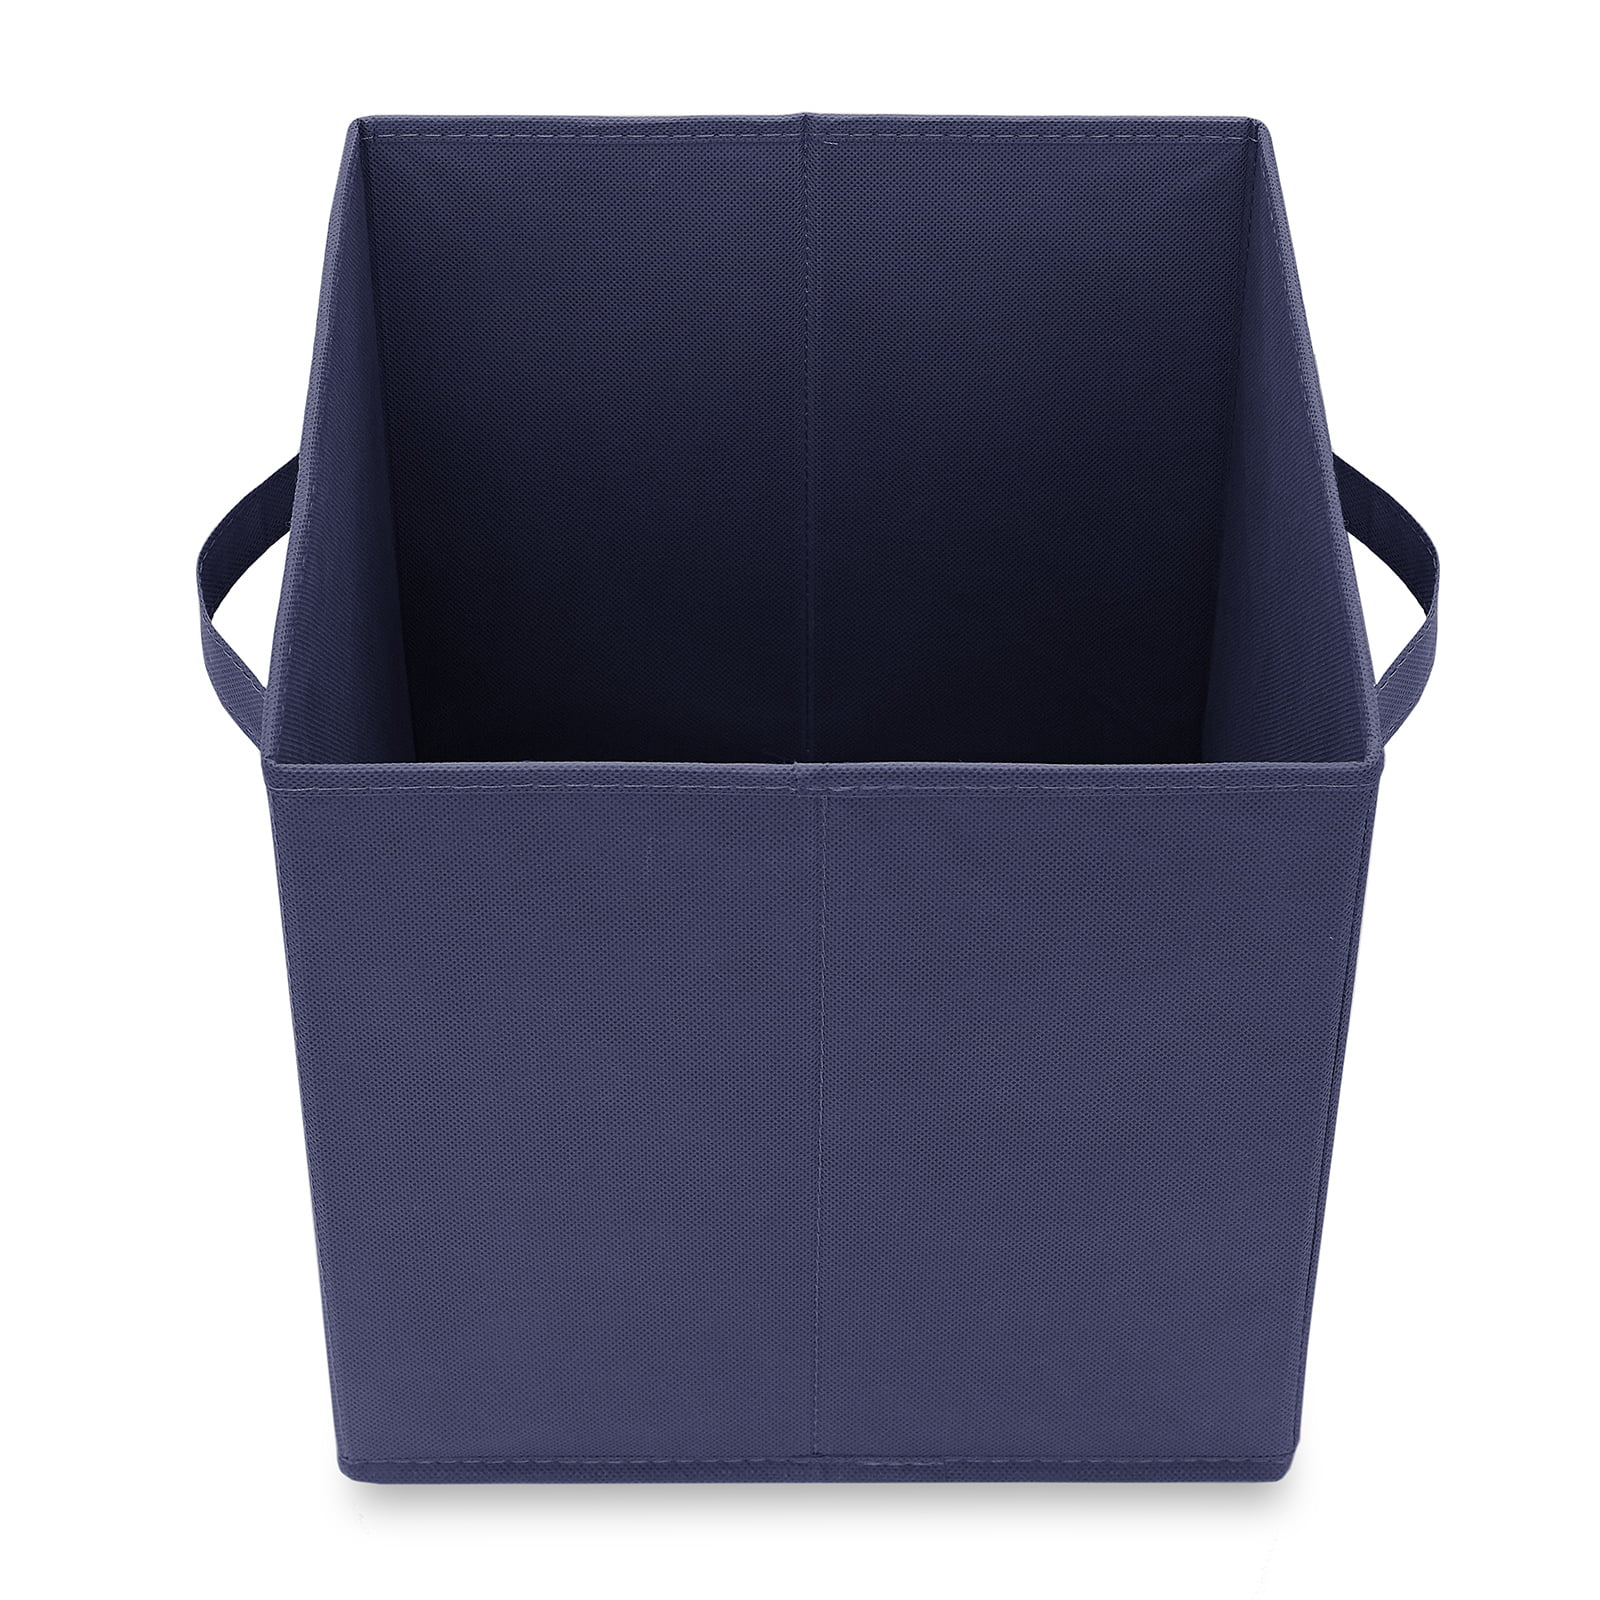 Casafield Set of 6 Collapsible Fabric Cube Storage Bins - 11 Foldable  Cloth Baskets for Shelves, Cubby Organizers & More